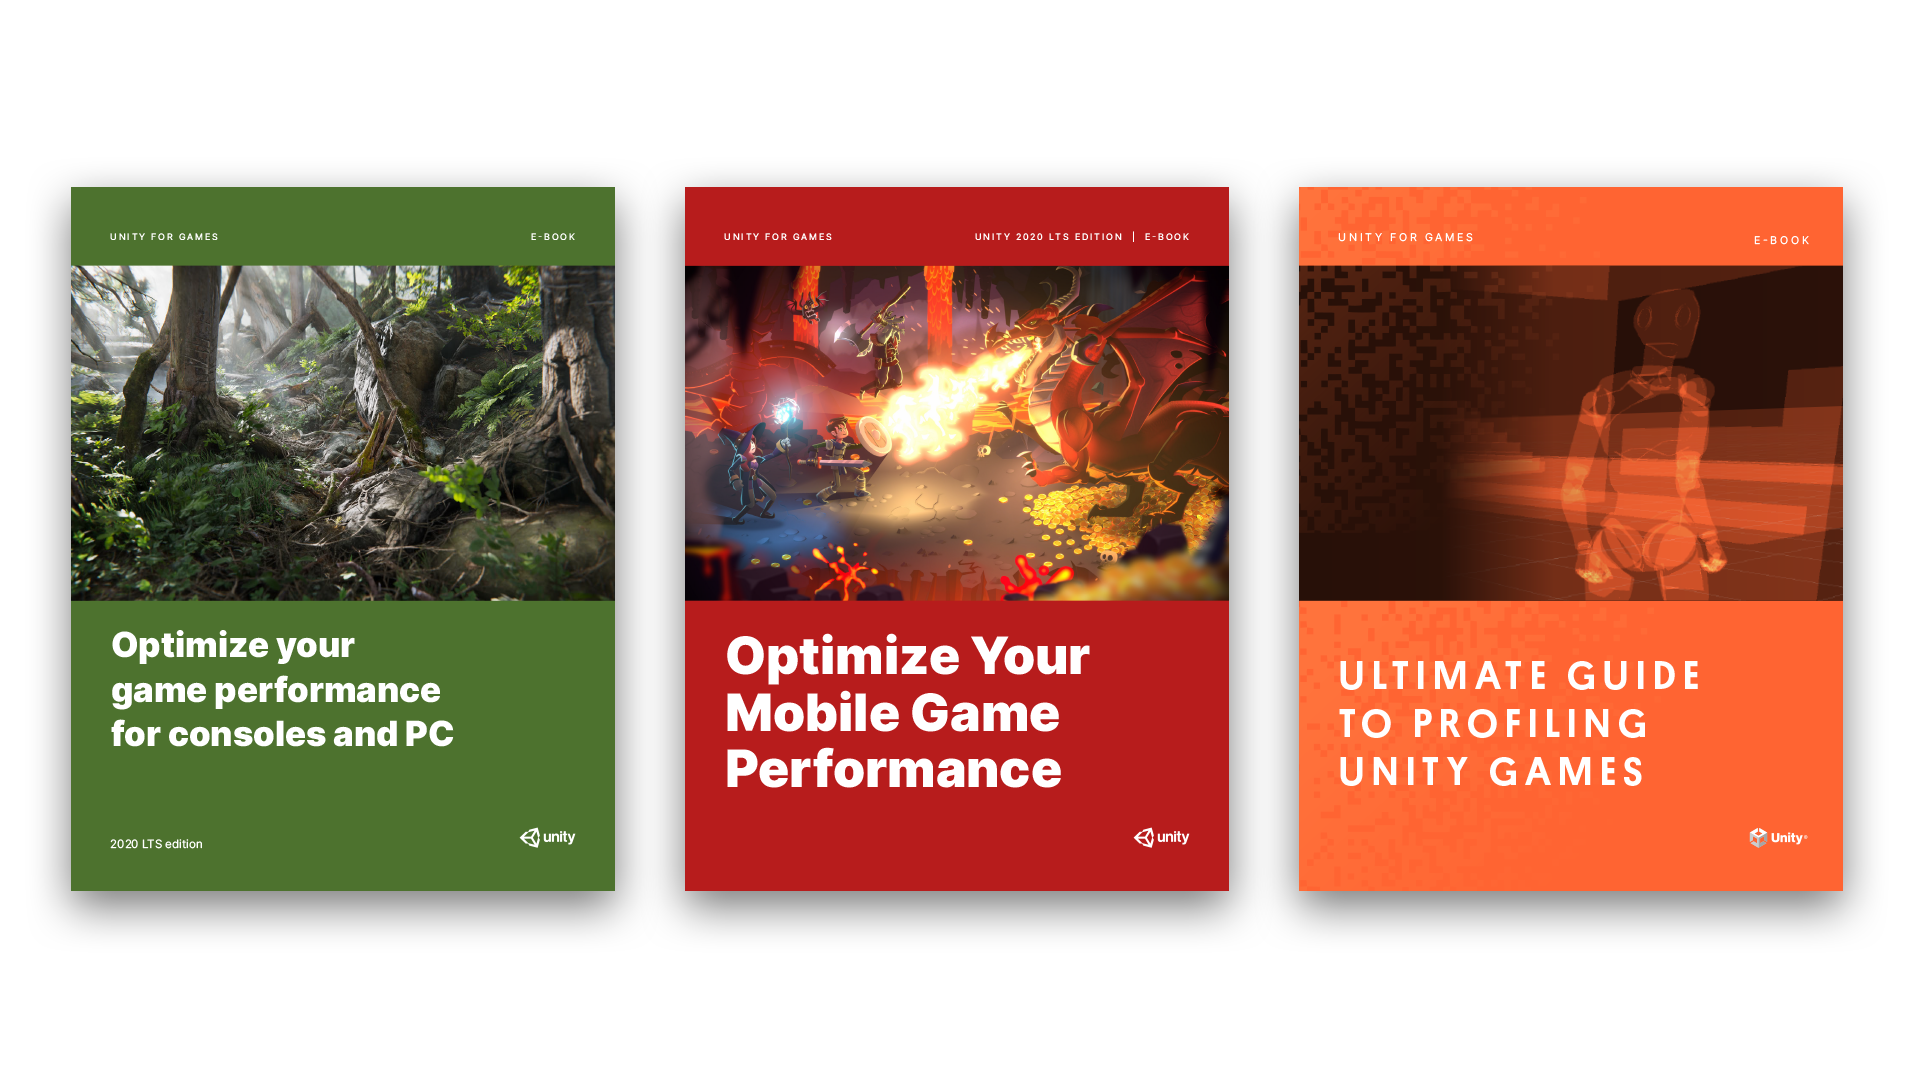 Game performance e-books from Unity, cover images of three side-by-side